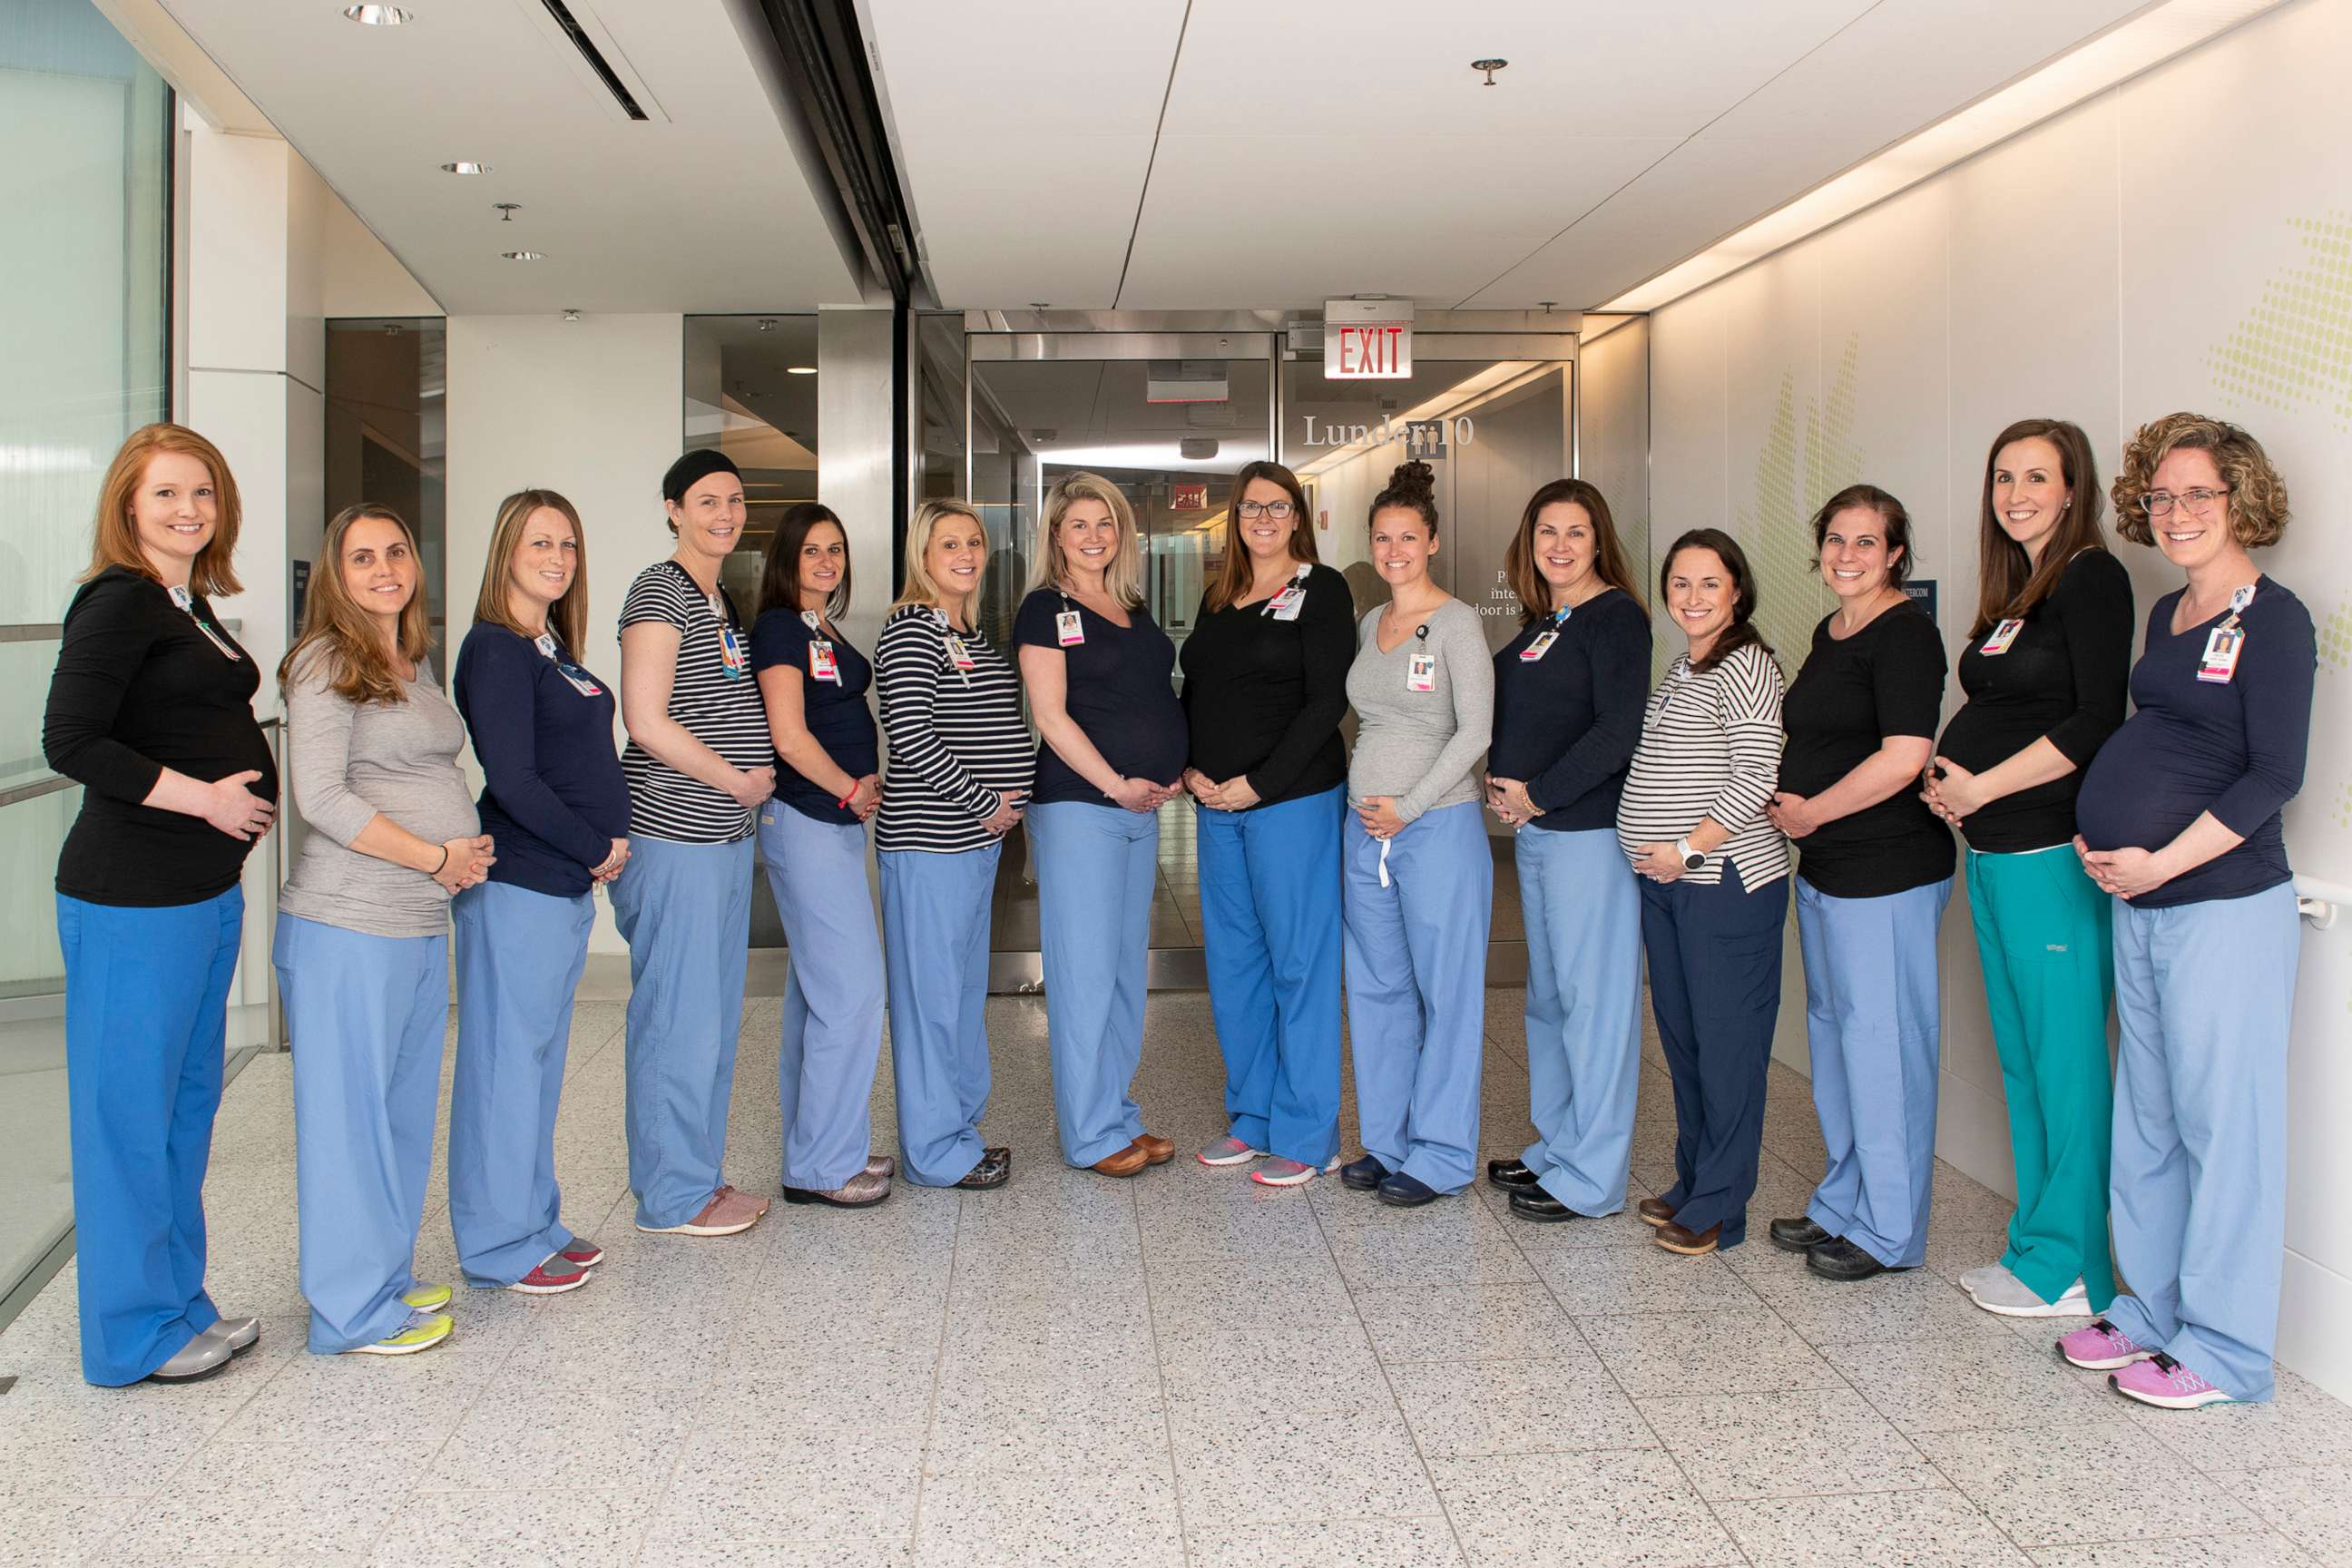 PHOTO: Fourteen pregnant nurses from the oncology unit of Massachusetts General Hospital in Boston are pictured in an undated handout photo.